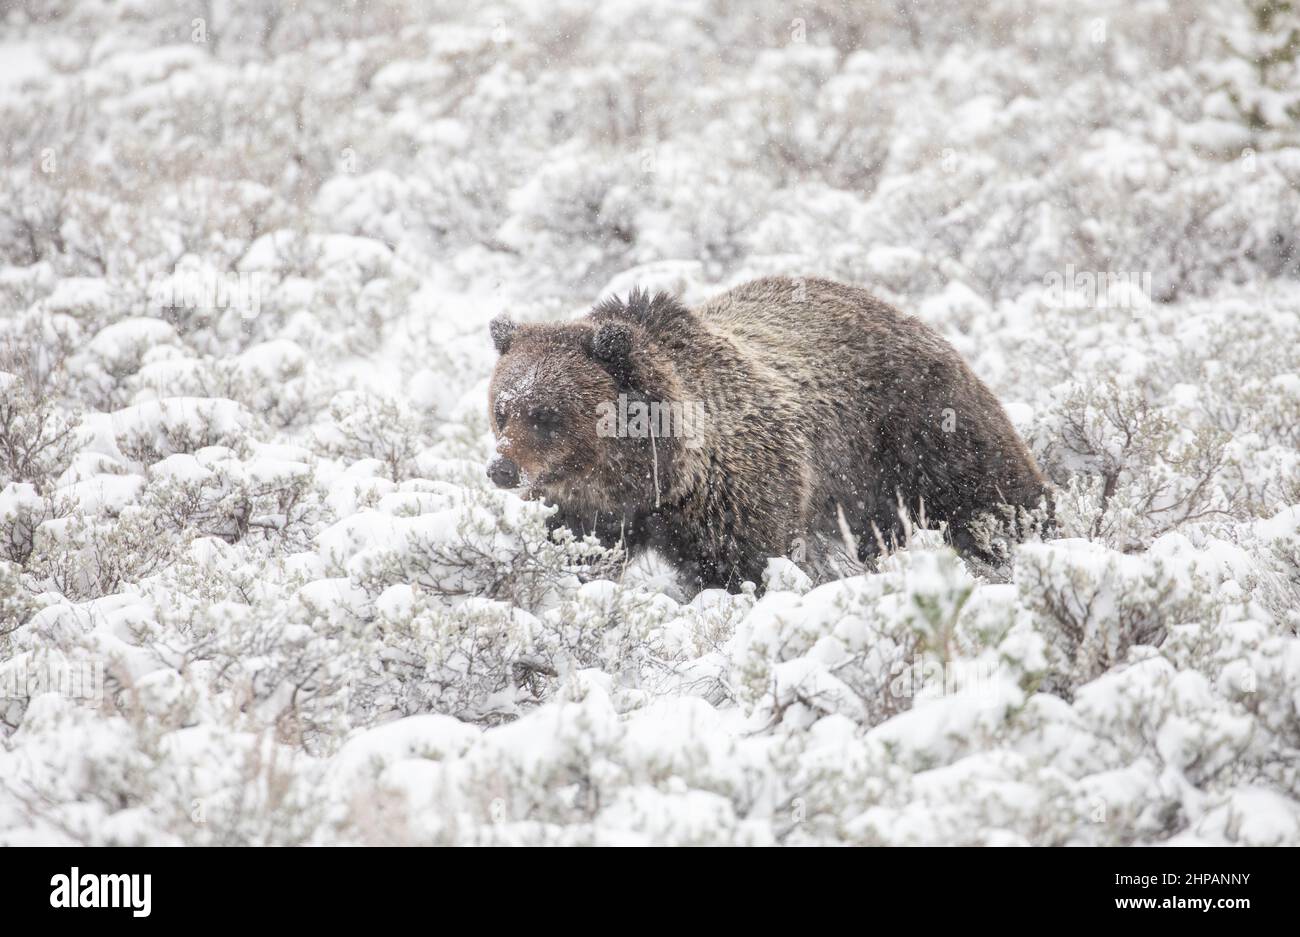 A grizzly bear walks through snow on Swan Lake Flat in winter at Yellowstone National Park in Yellowstone, Wyoming. Stock Photo